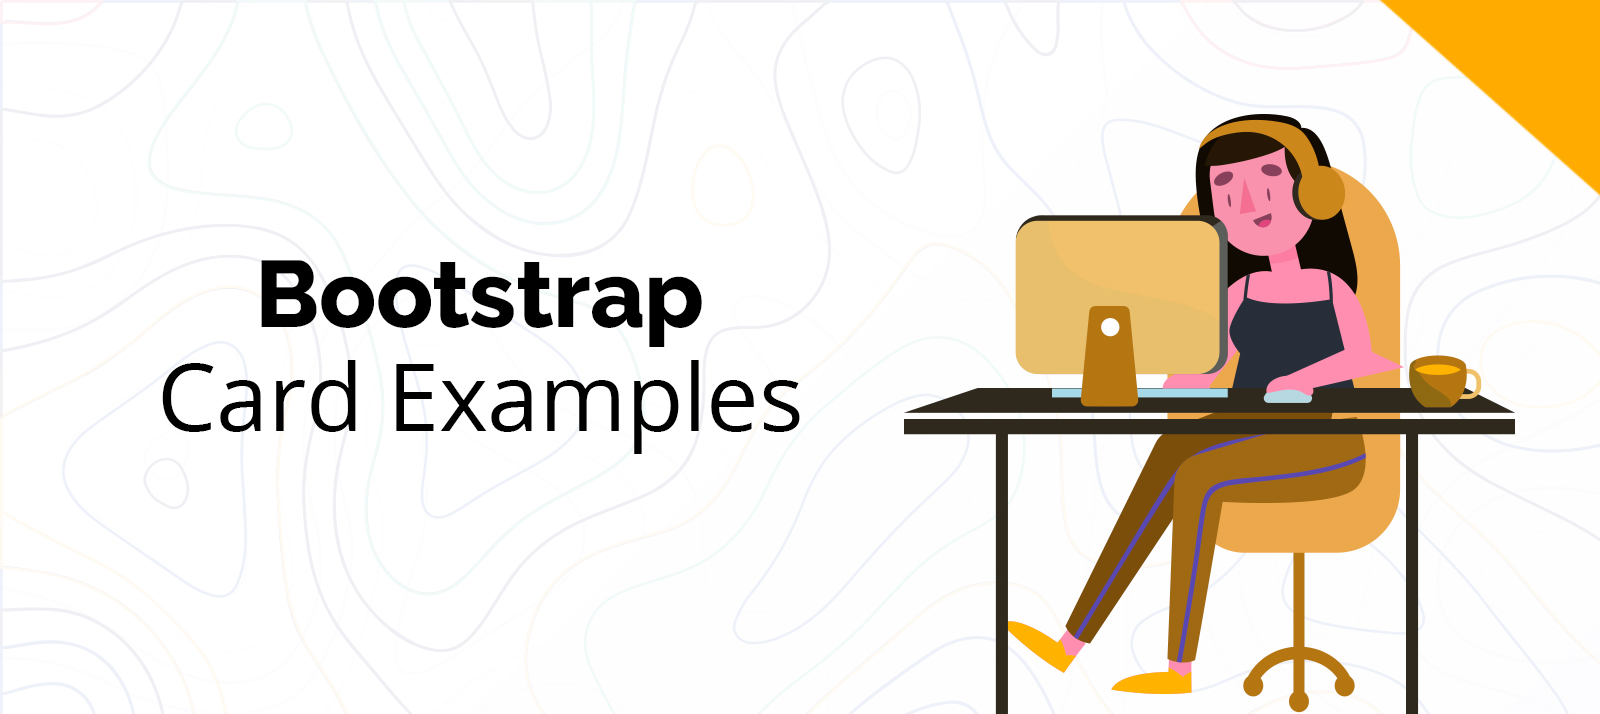  10 Free Bootstrap Card Examples To Guarantee a Better User Experience 